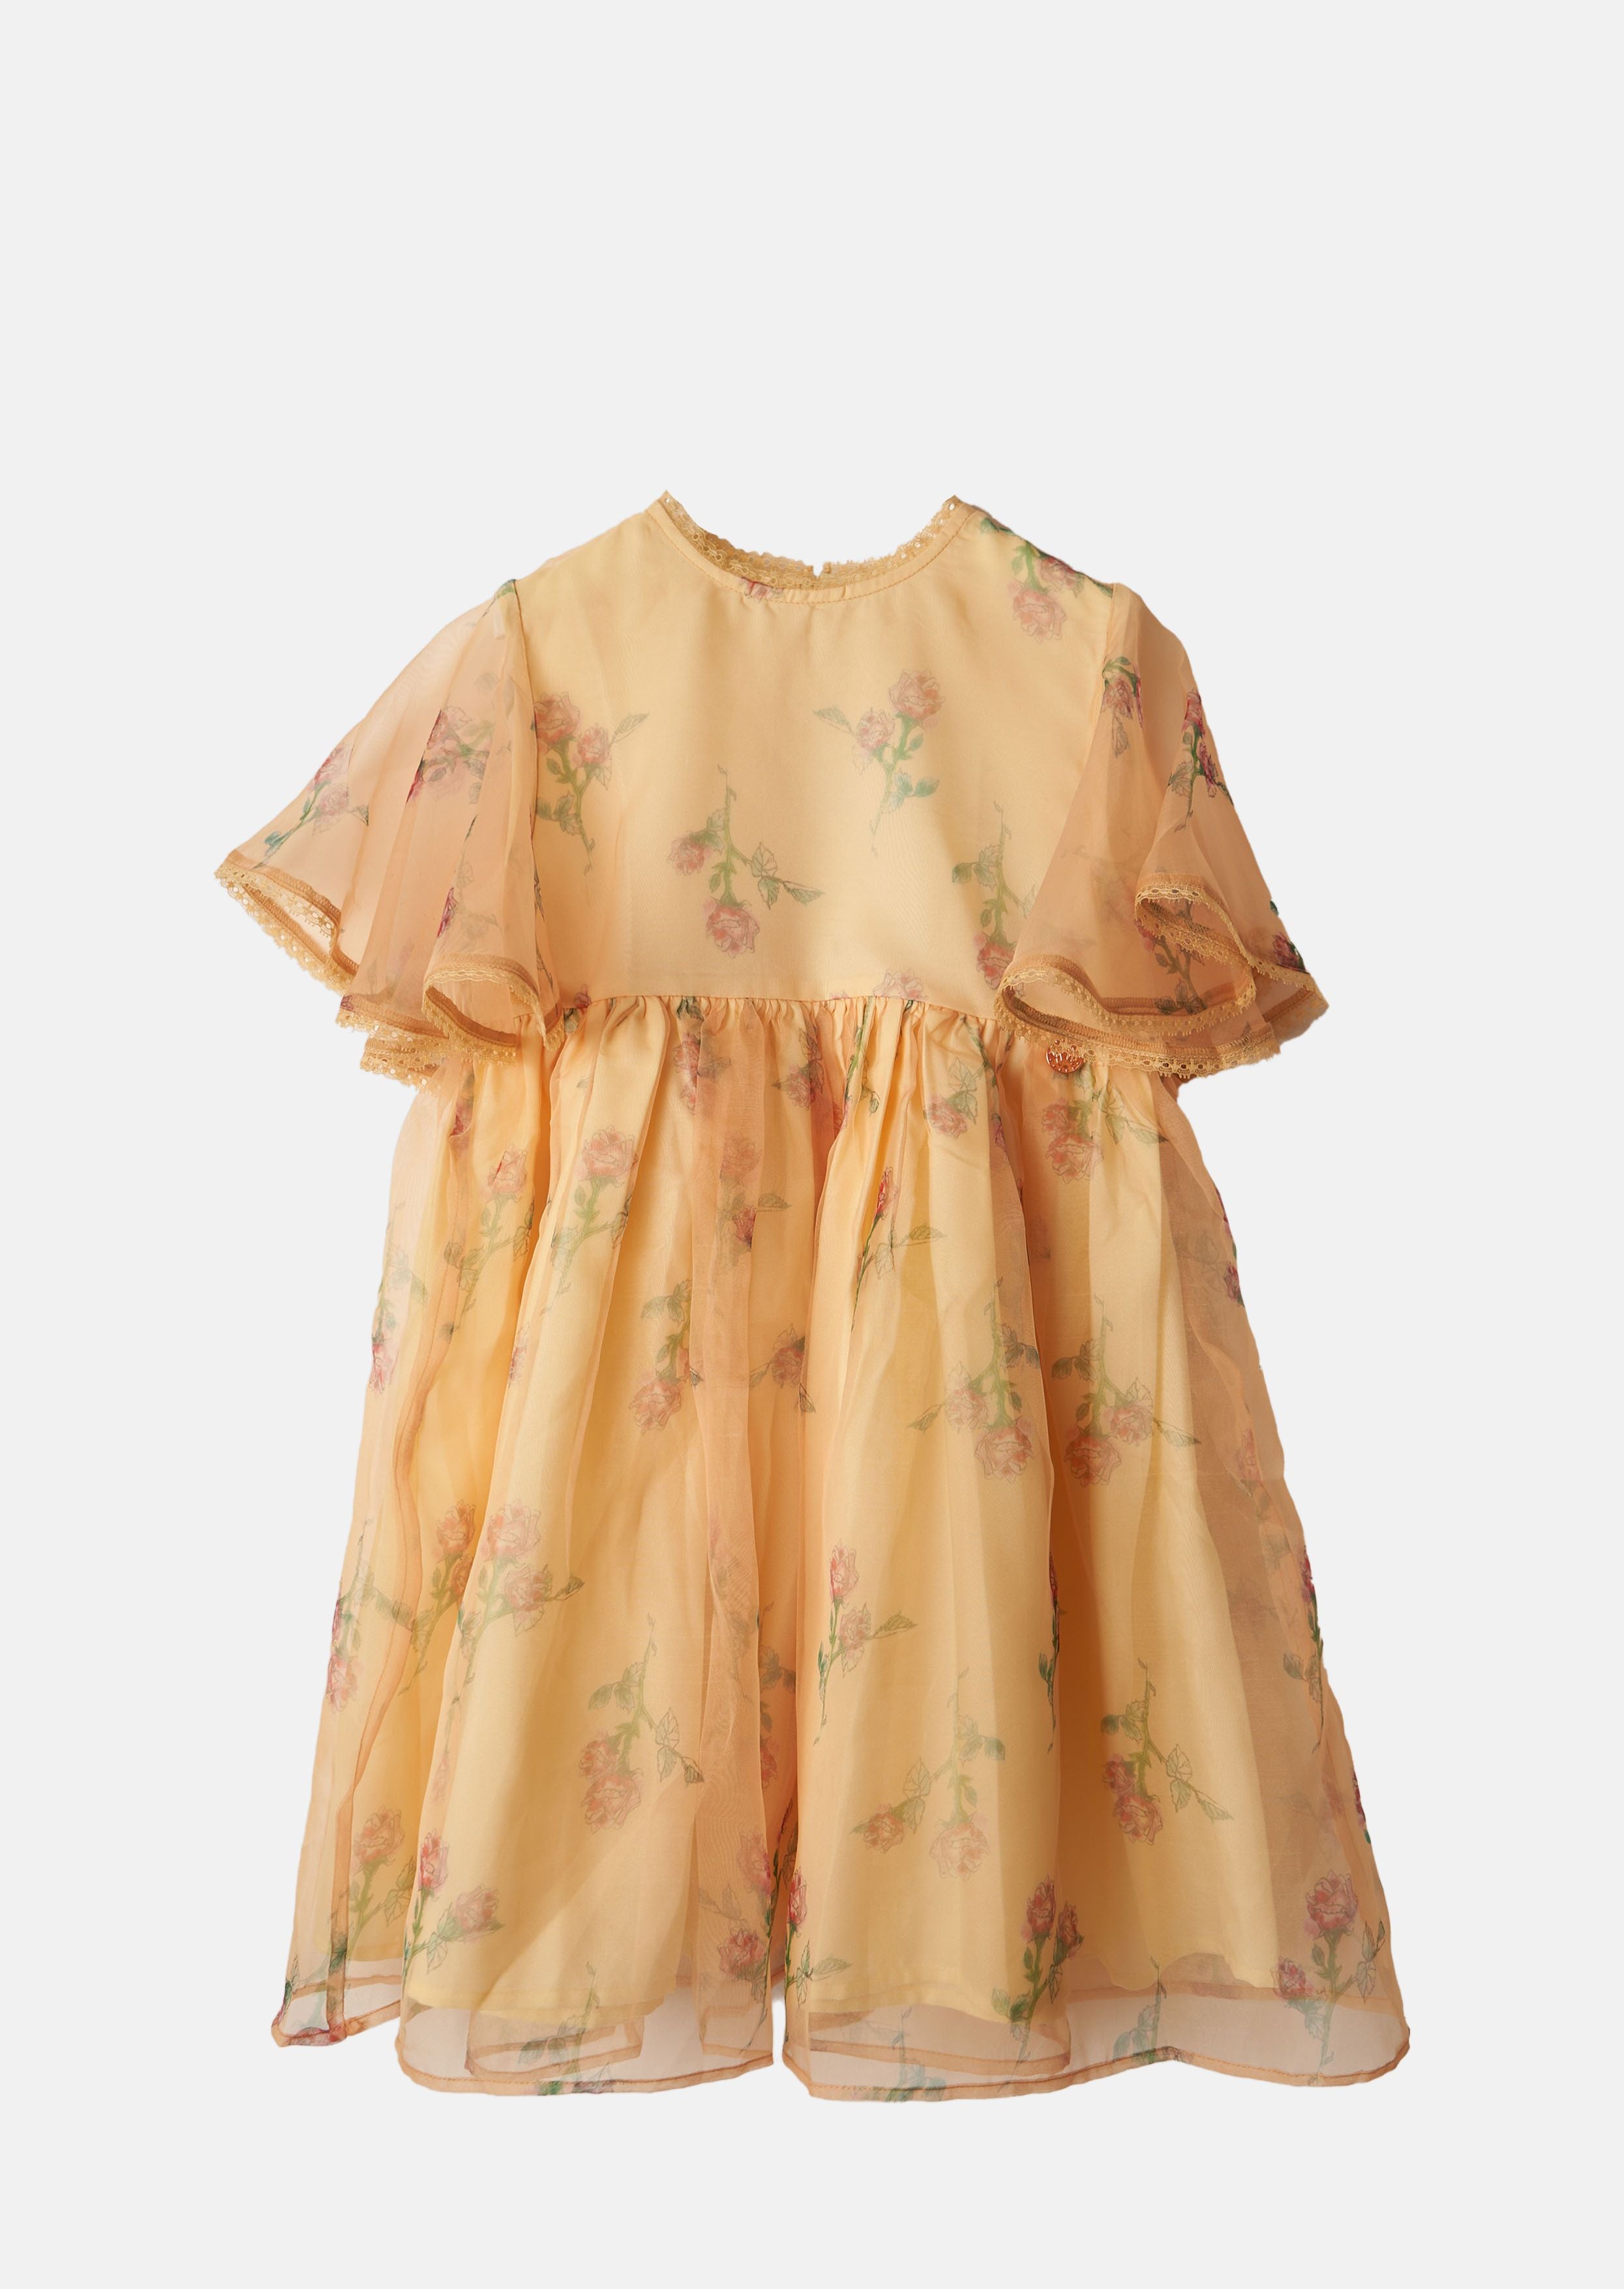 Girls Floral Printed Yellow Dress with Cape Sleeved